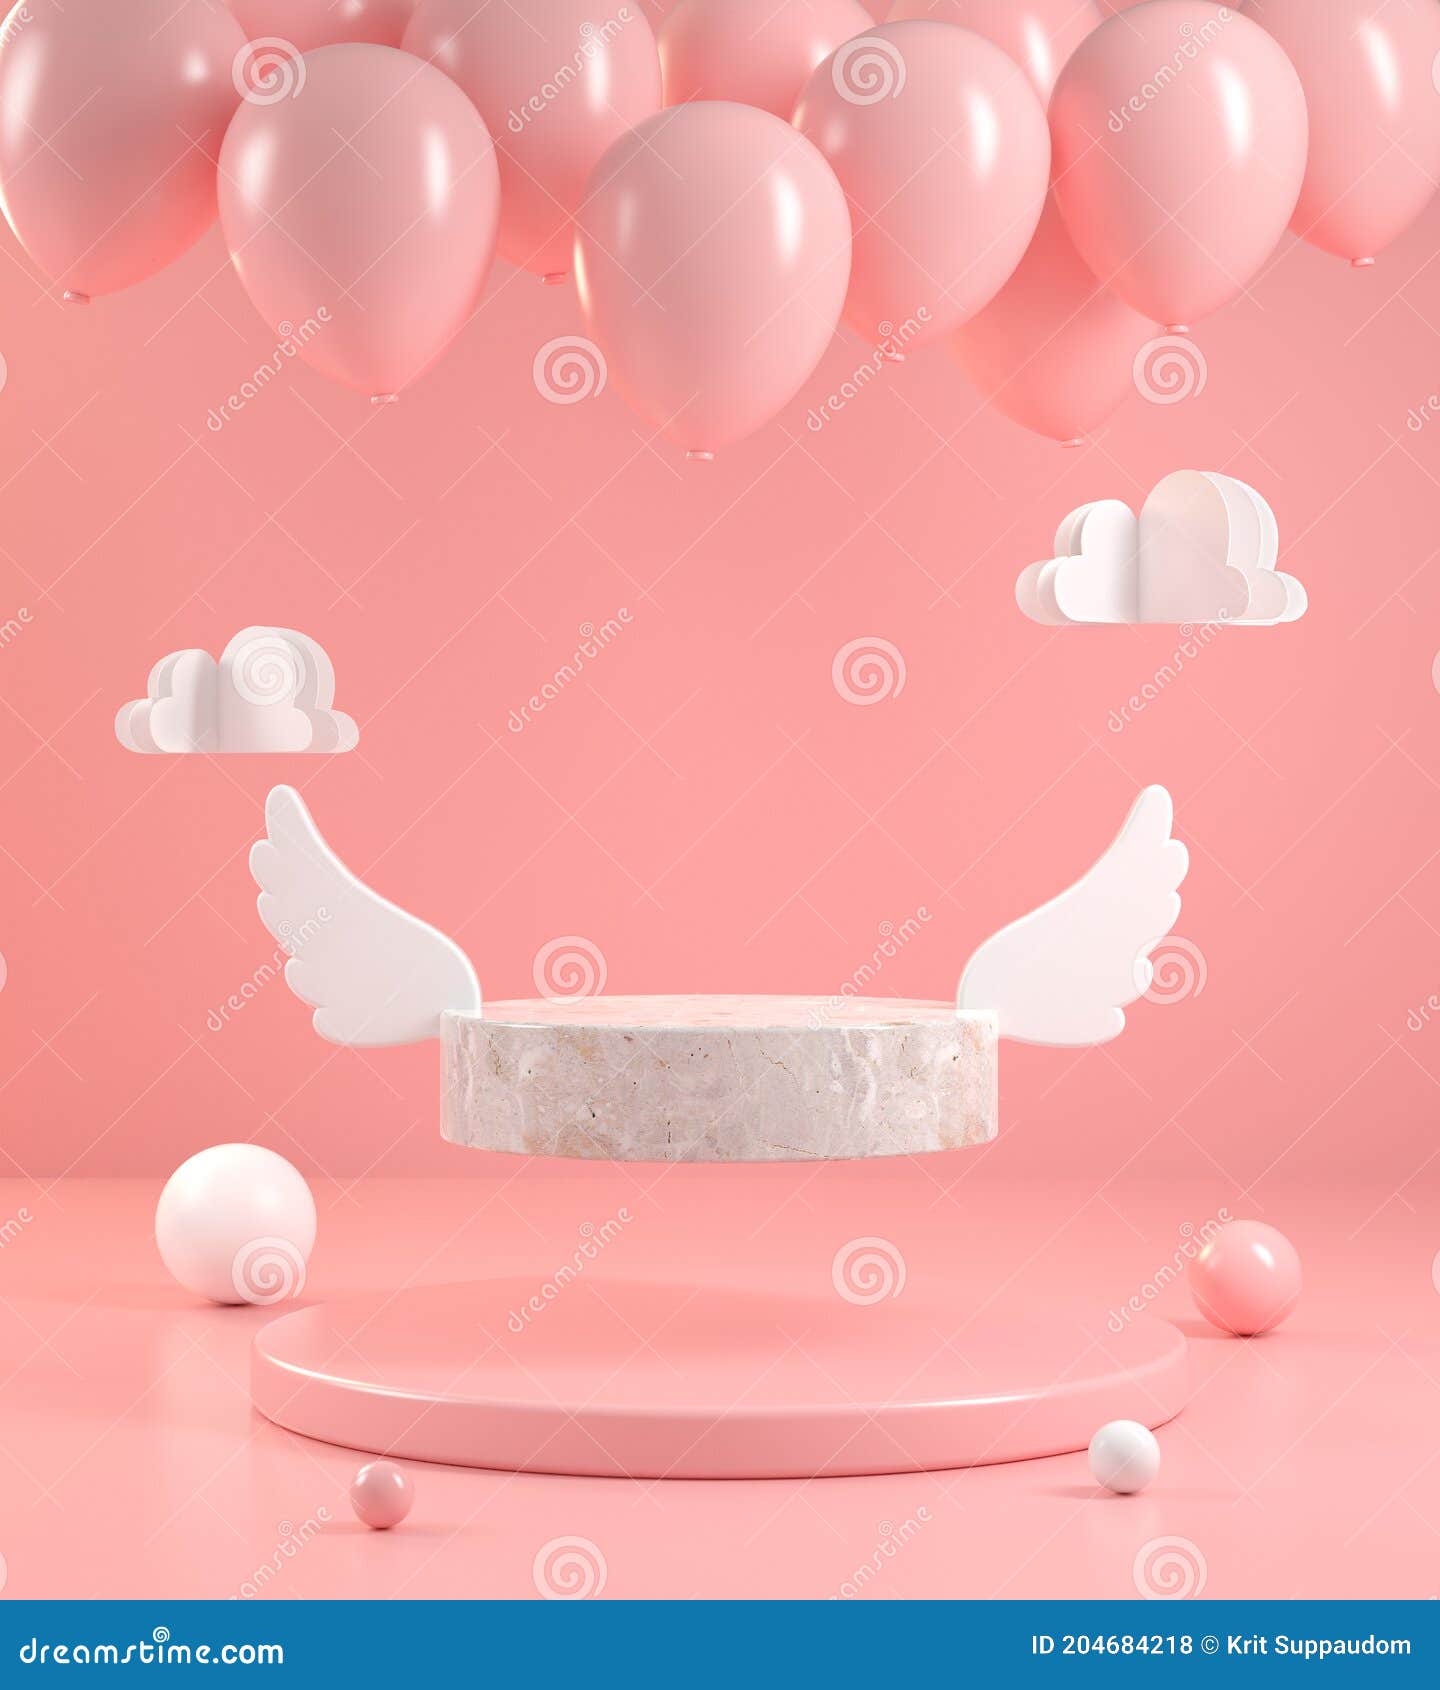 minimal form stone wing display fly with balloon on pink pastel abstract bakground 3d render